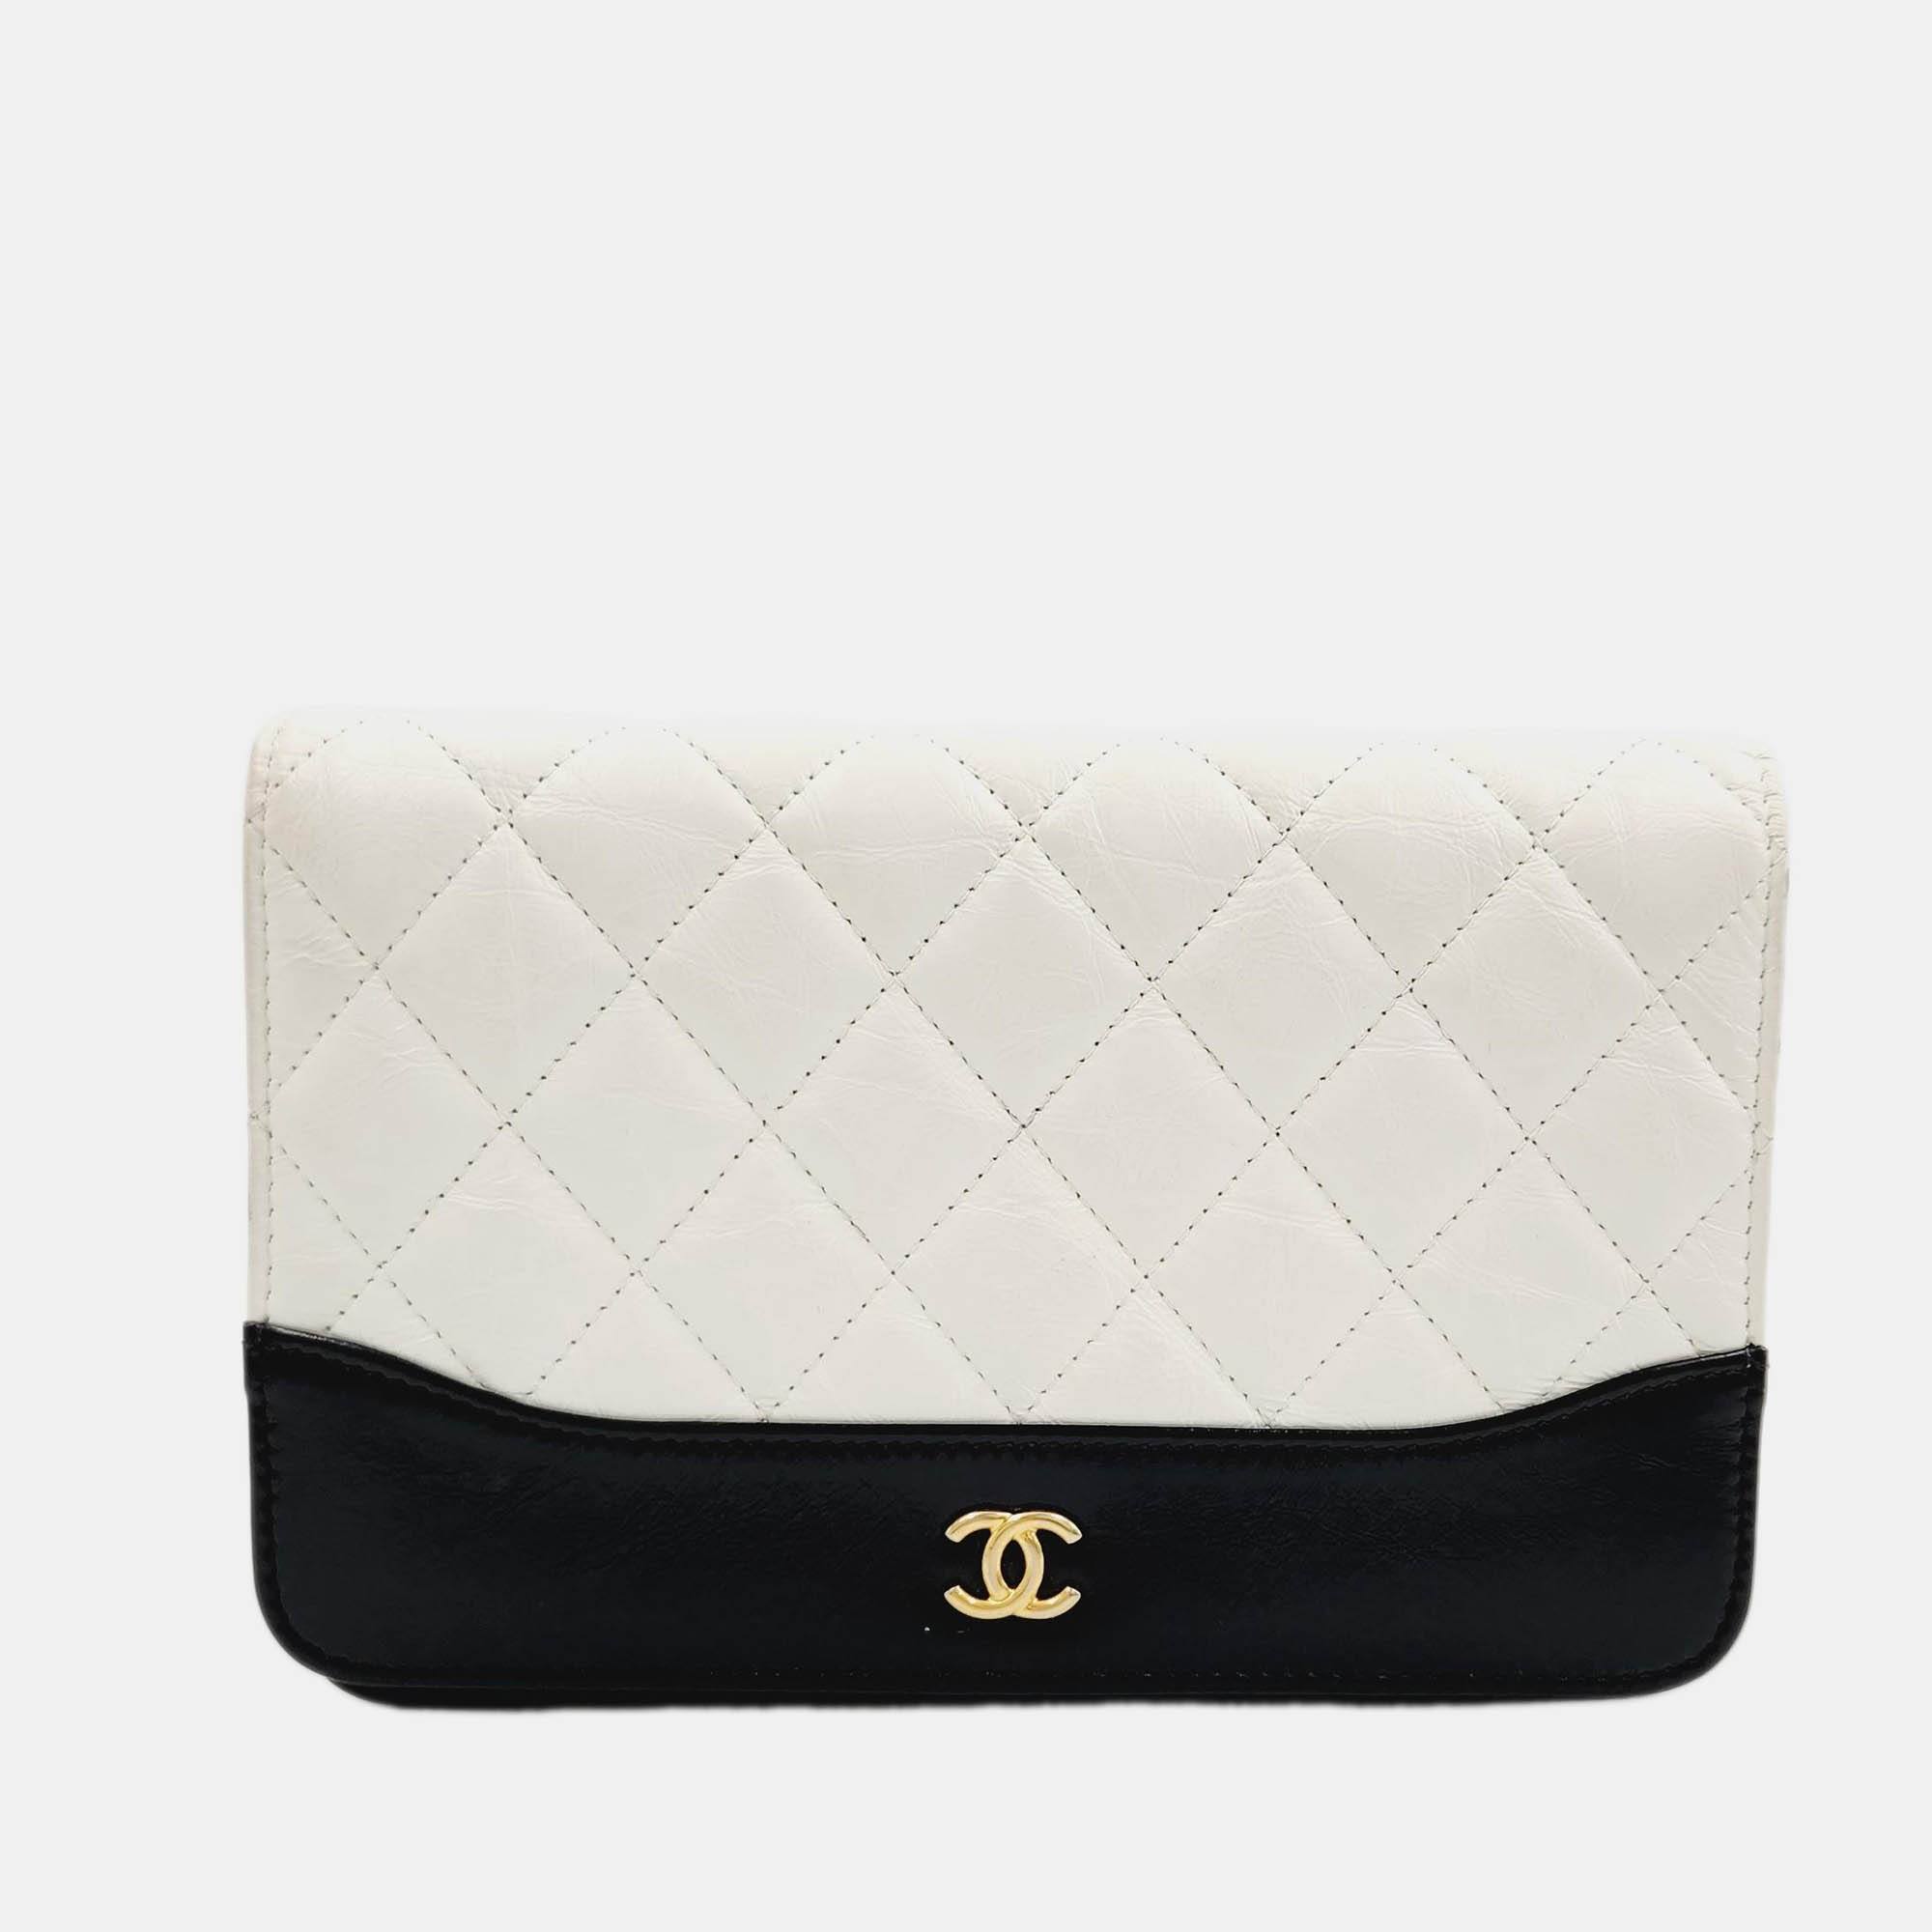 Chanel black/white leather gabrielle wallet on chain